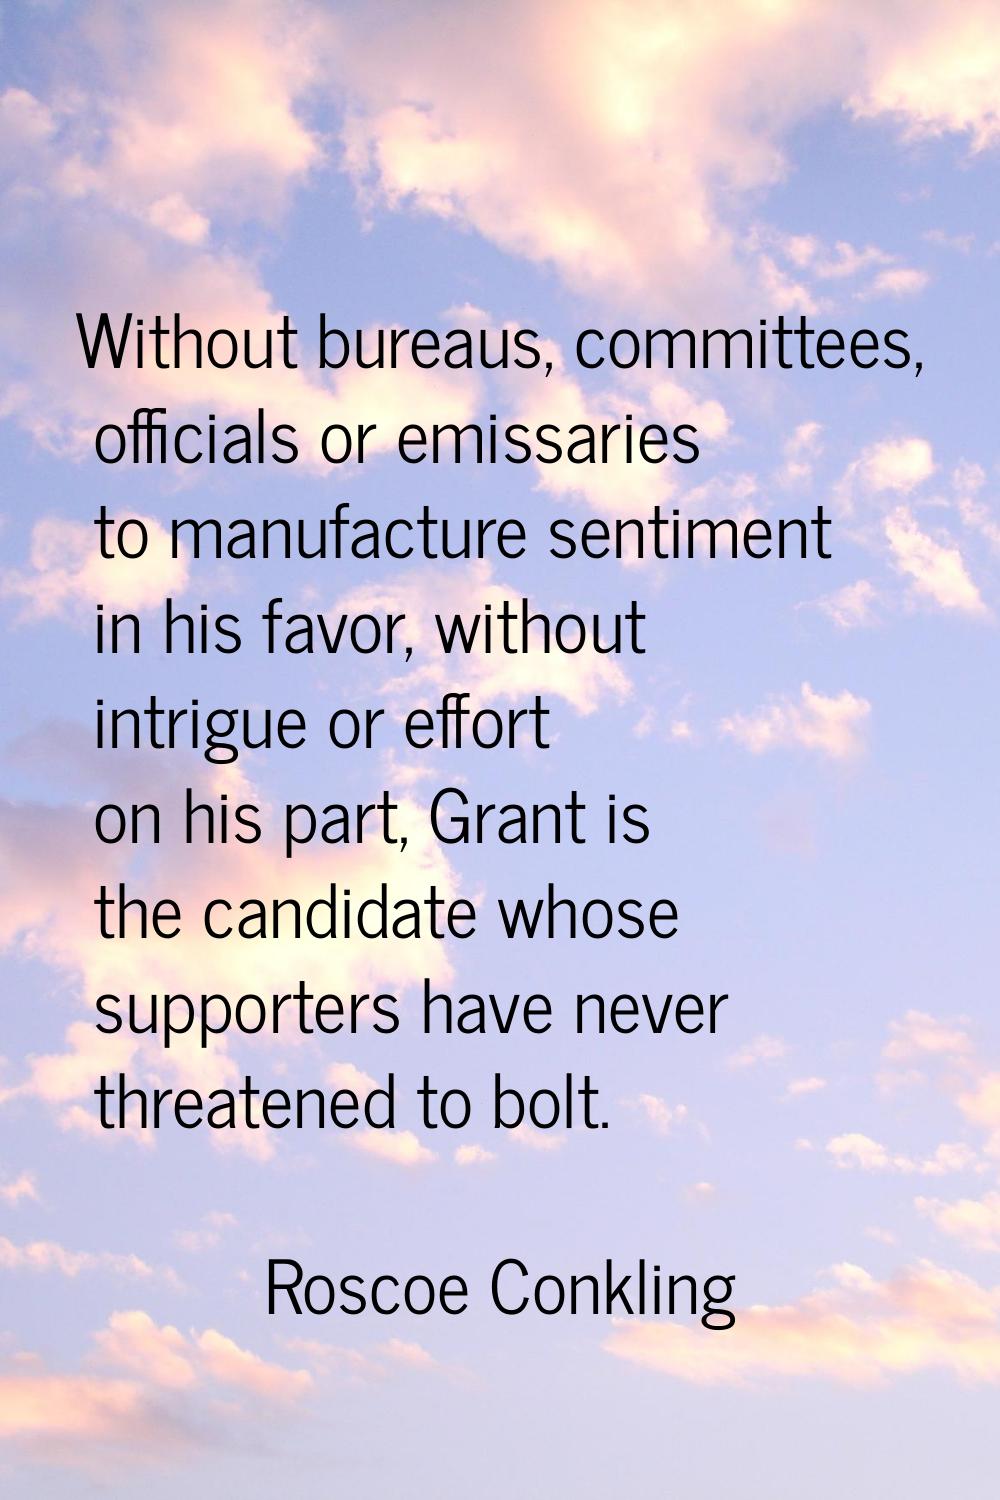 Without bureaus, committees, officials or emissaries to manufacture sentiment in his favor, without